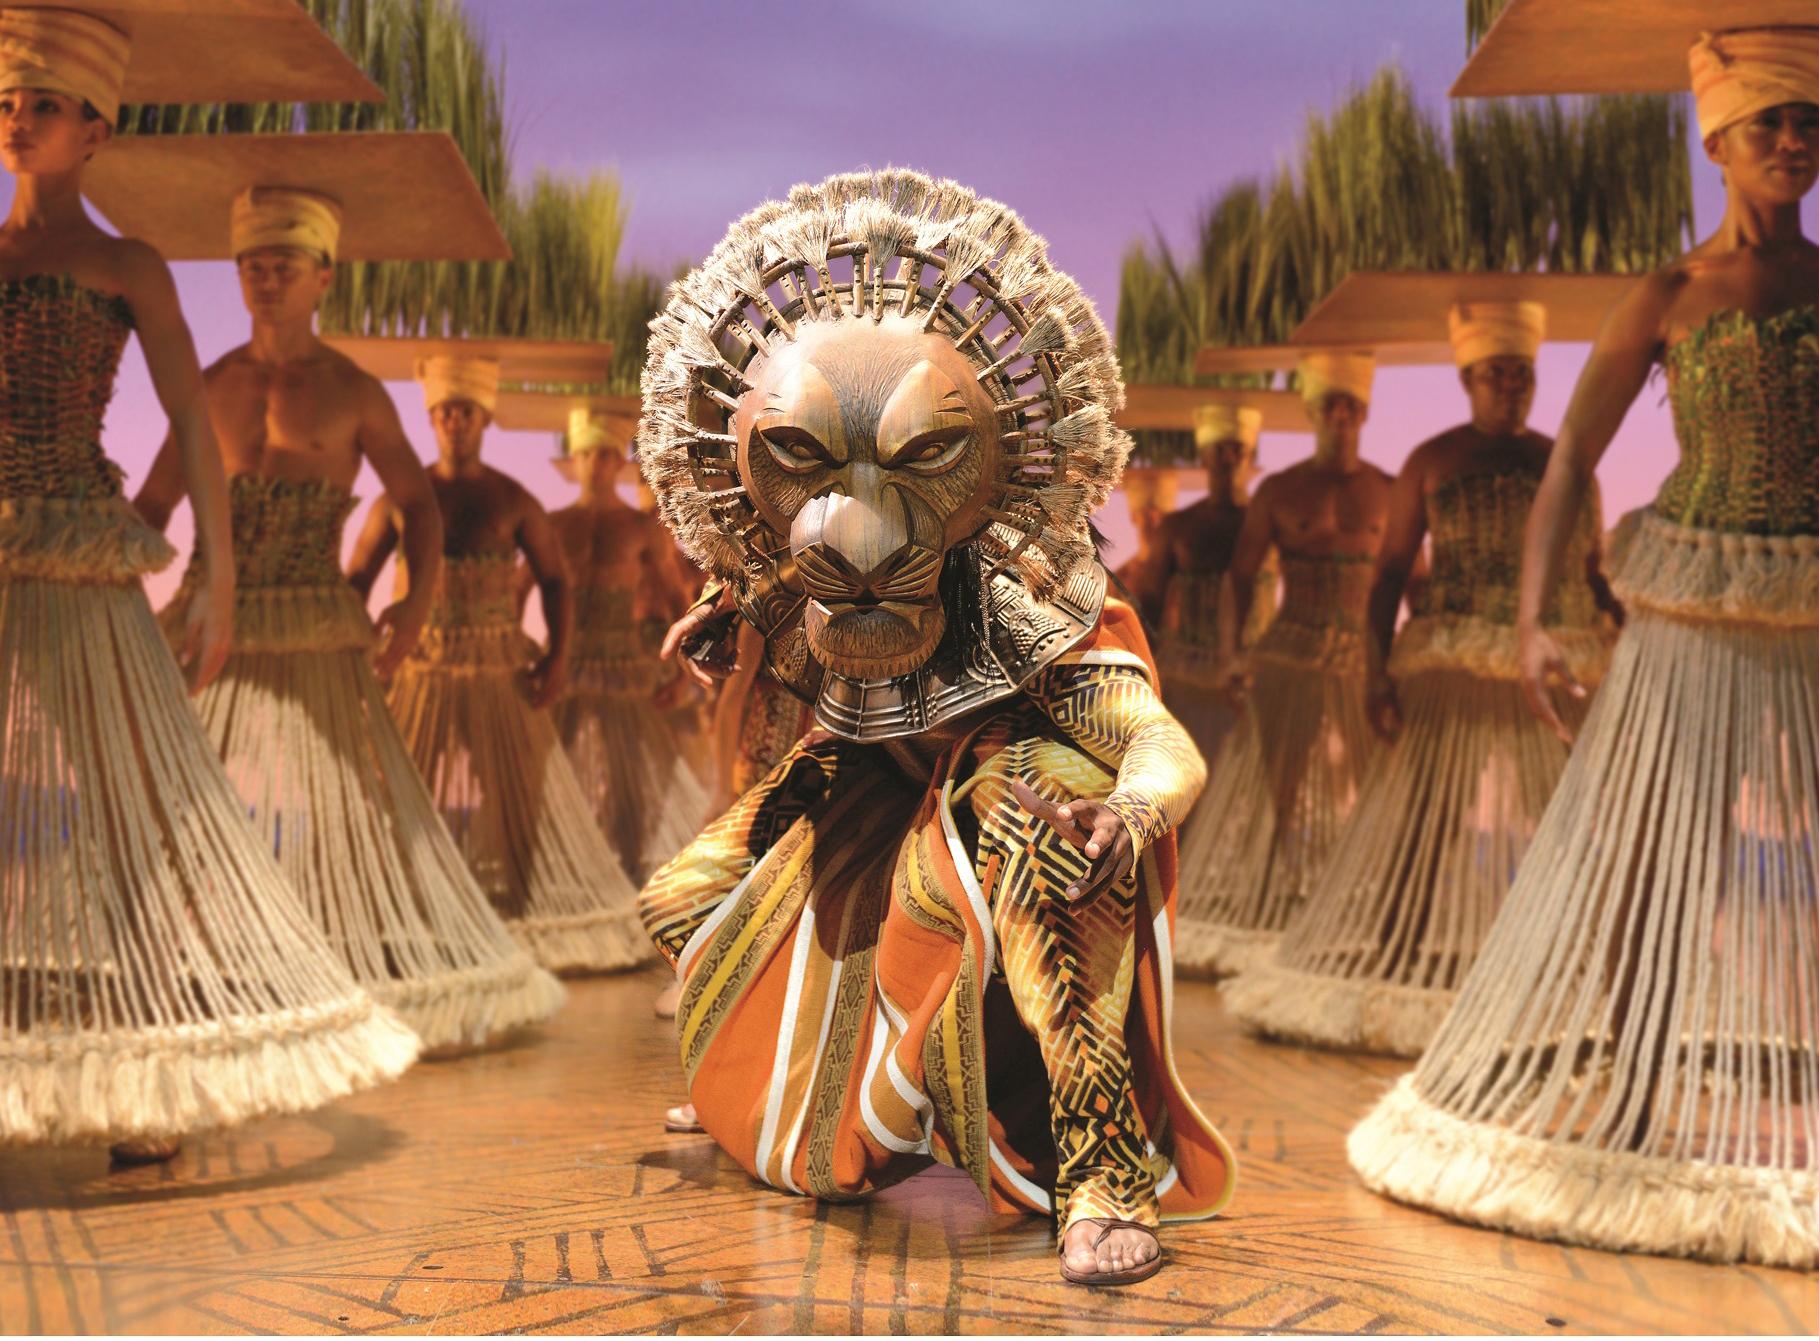 DISNEY'S THE LION KING SET FOR MIDDLE EAST DEBUT IN ABU DHABI THIS NOVEMBER